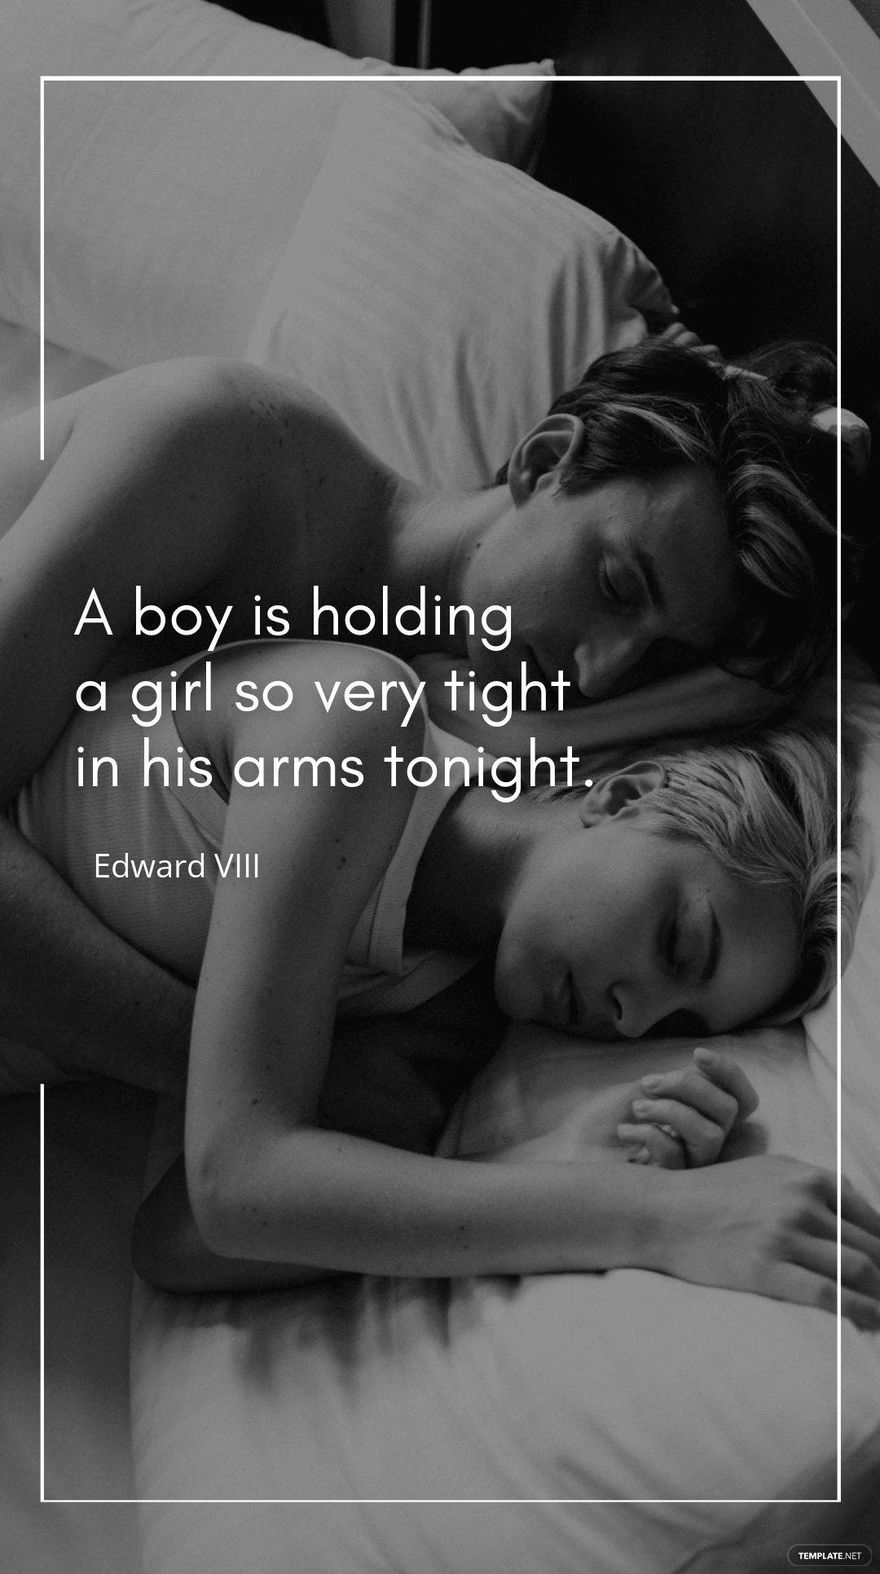 Edward VIII - “A boy is holding a girl so very tight in his arms tonight.”